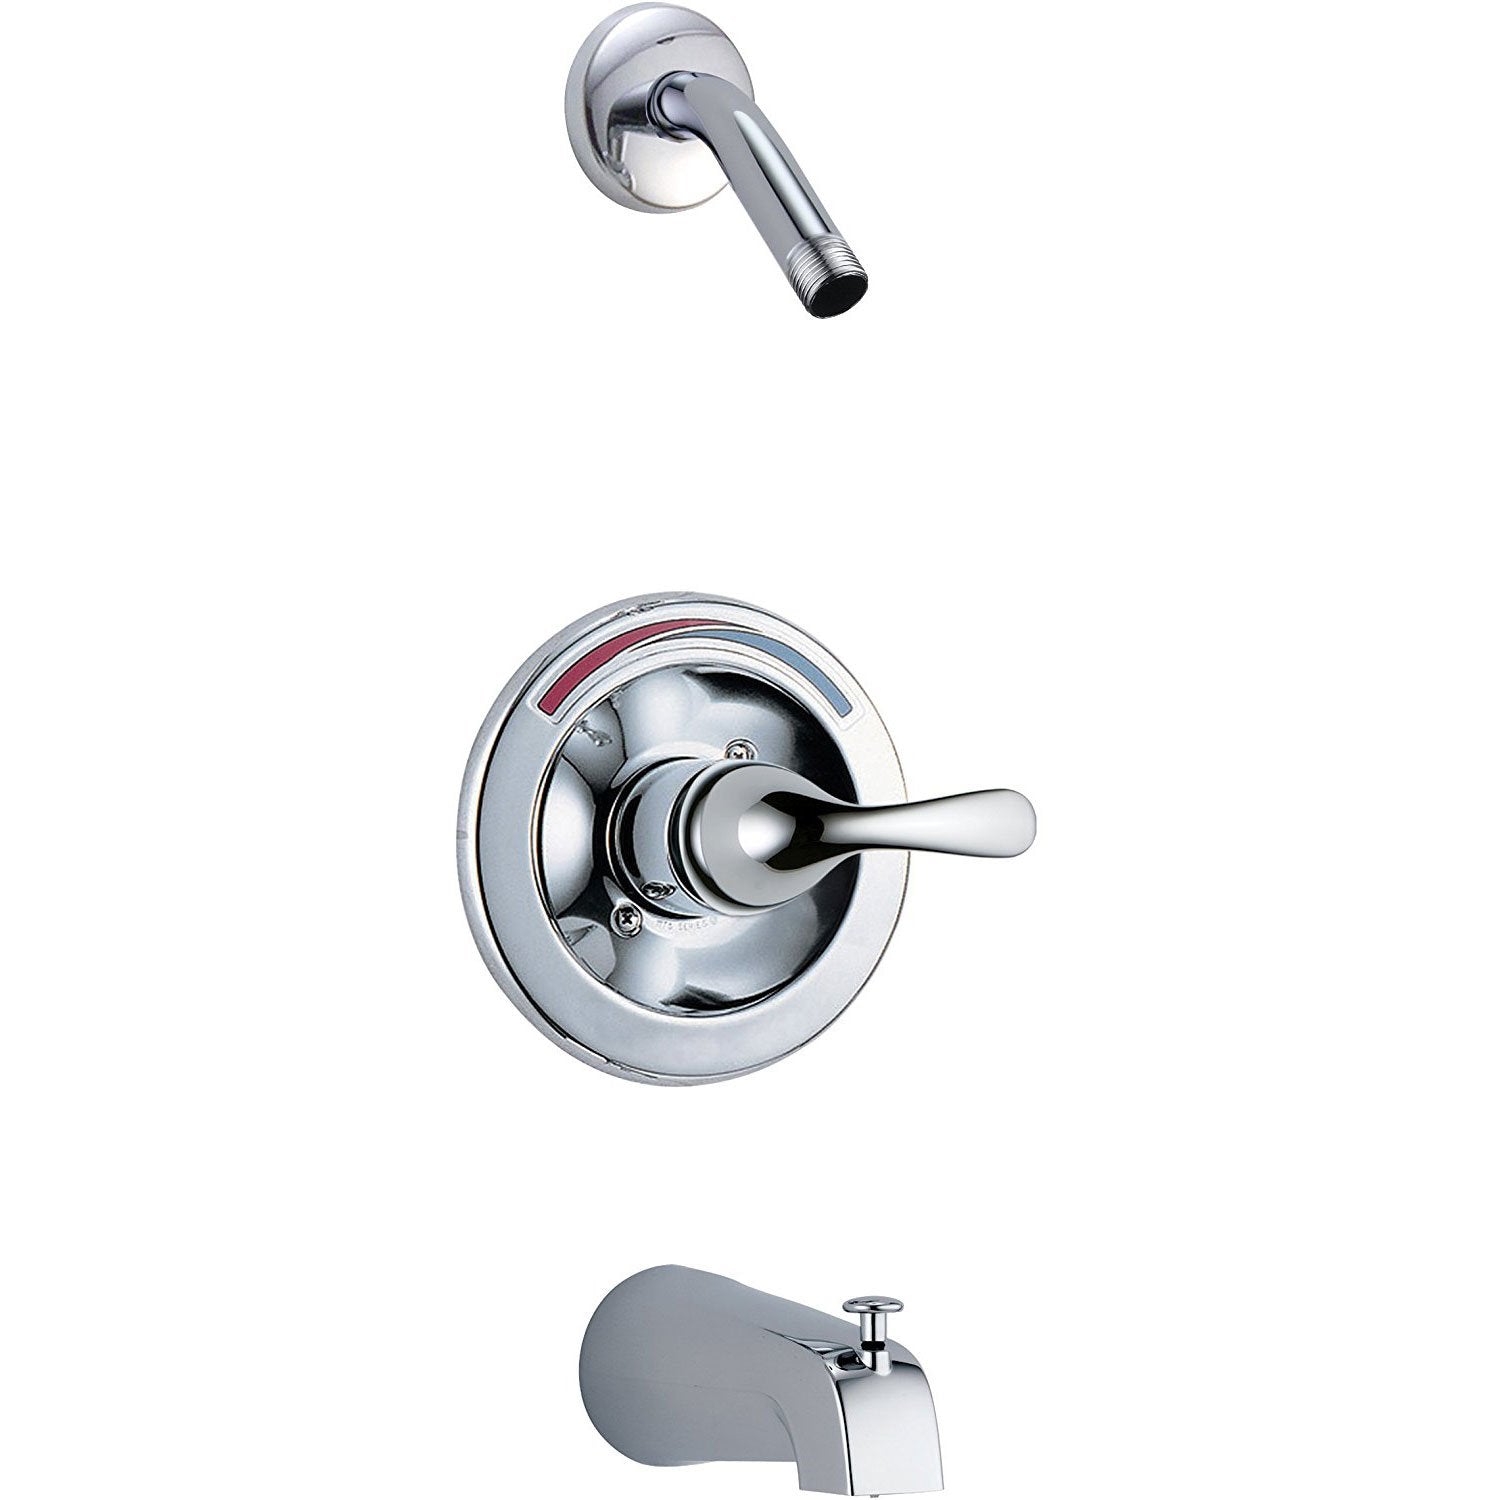 Delta Chrome Finish Monitor 13 Series Classic Style Single Handle Tub and Shower Faucet Trim Kit - Less Showerhead Includes Rough-in Valve without Stops D2513V